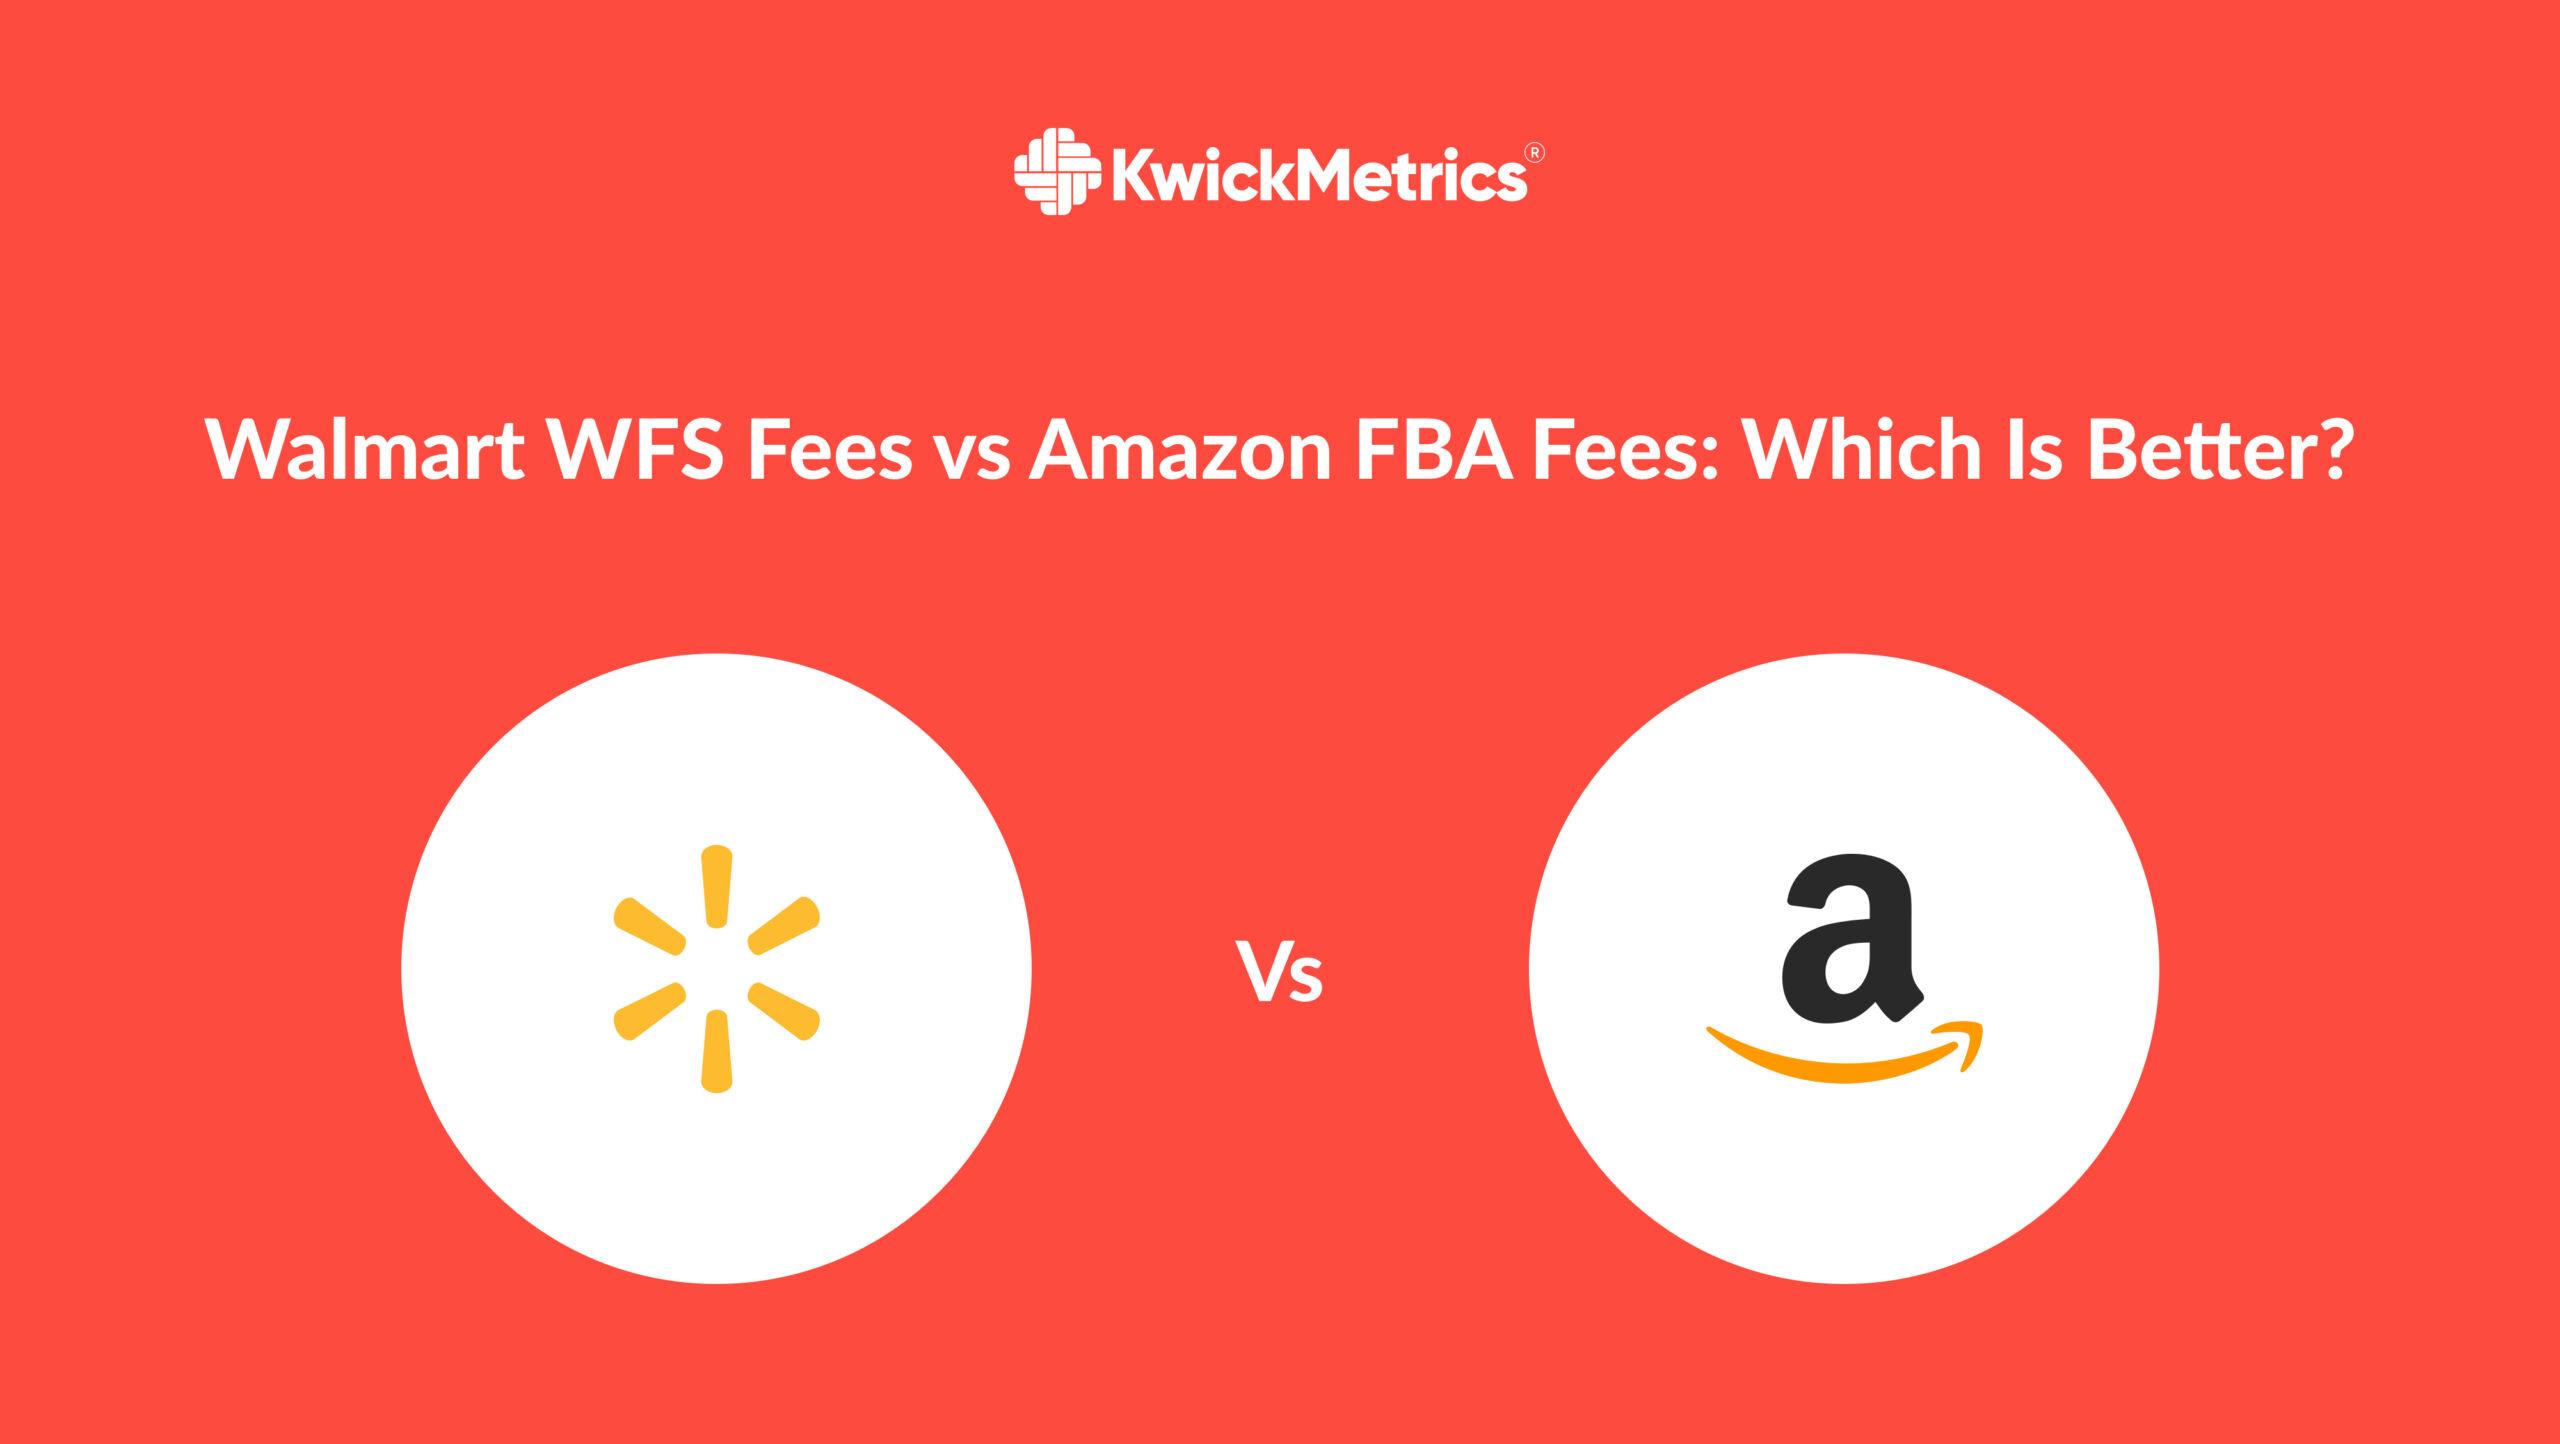 Walmart WFS Fees vs Amazon FBA Fees: Which Is Better? 